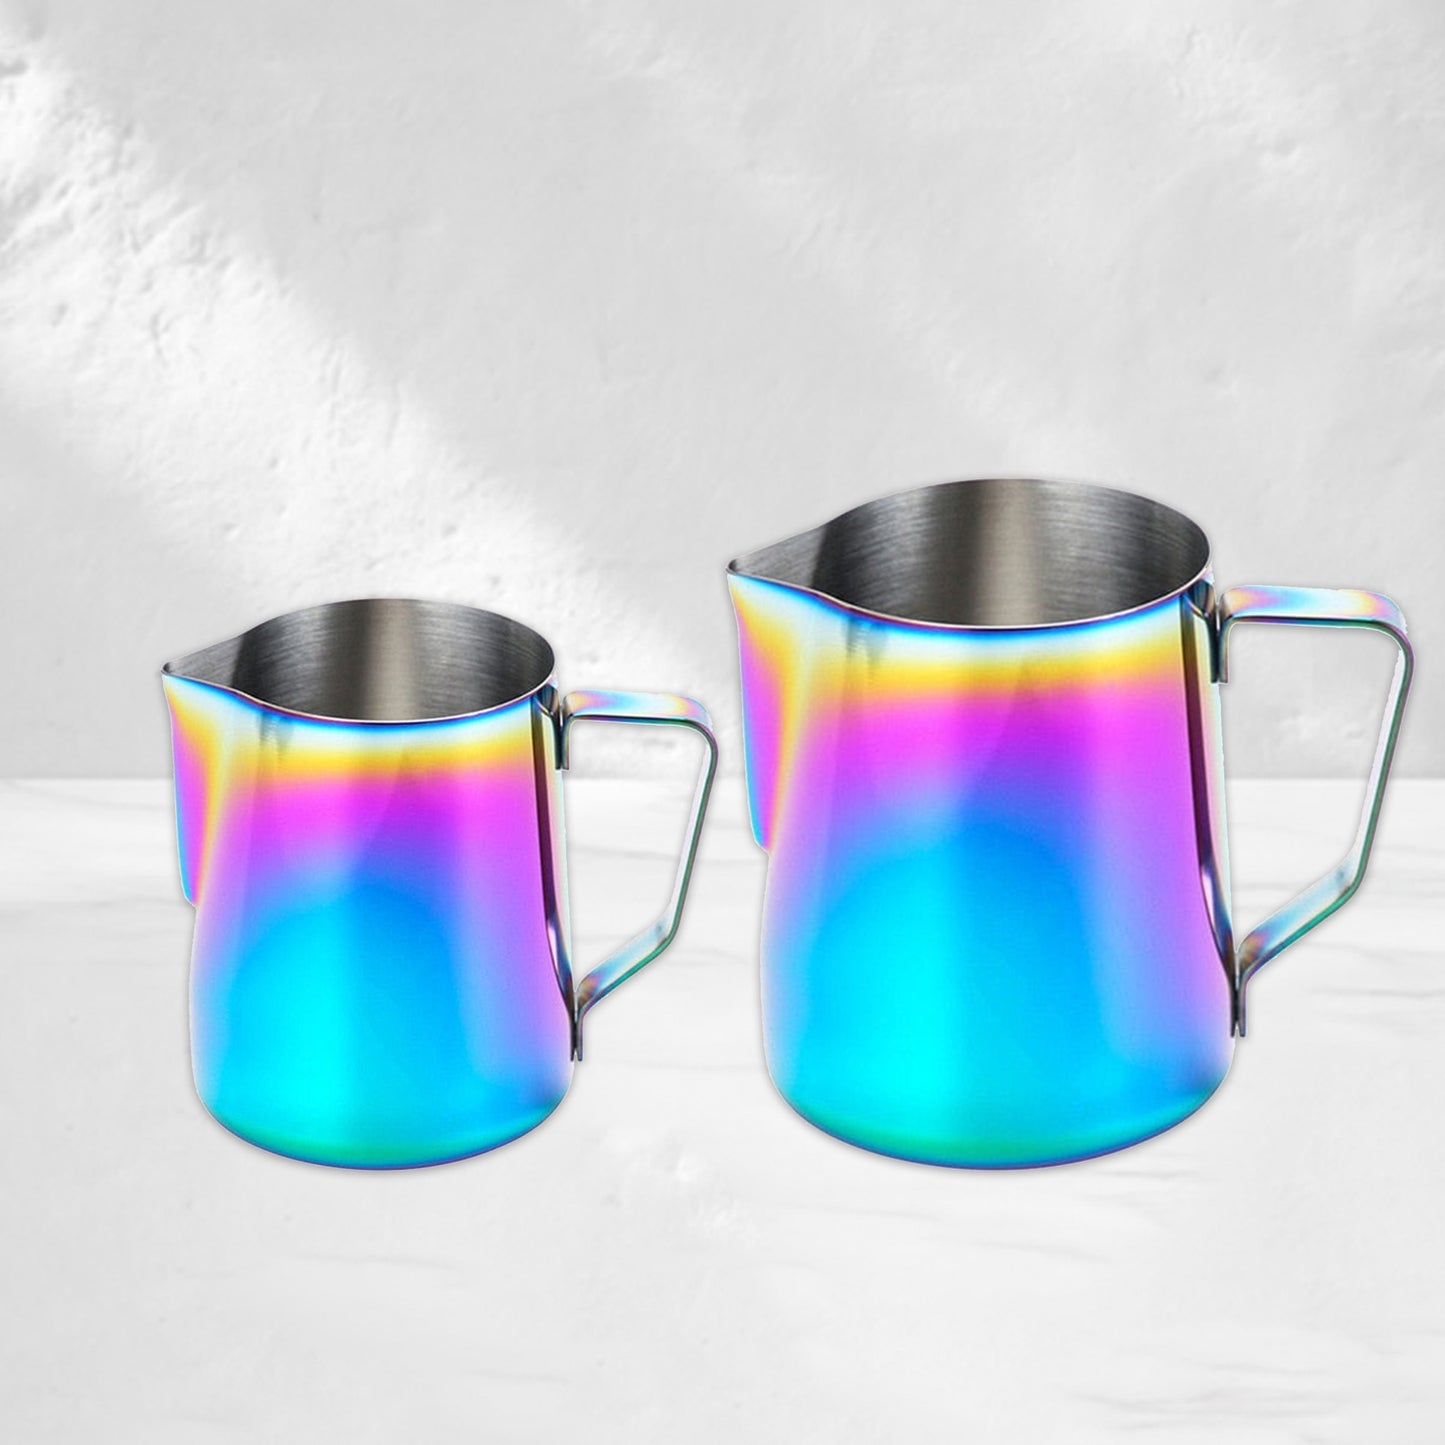 Purple Blue Milk Frothing Pitcher